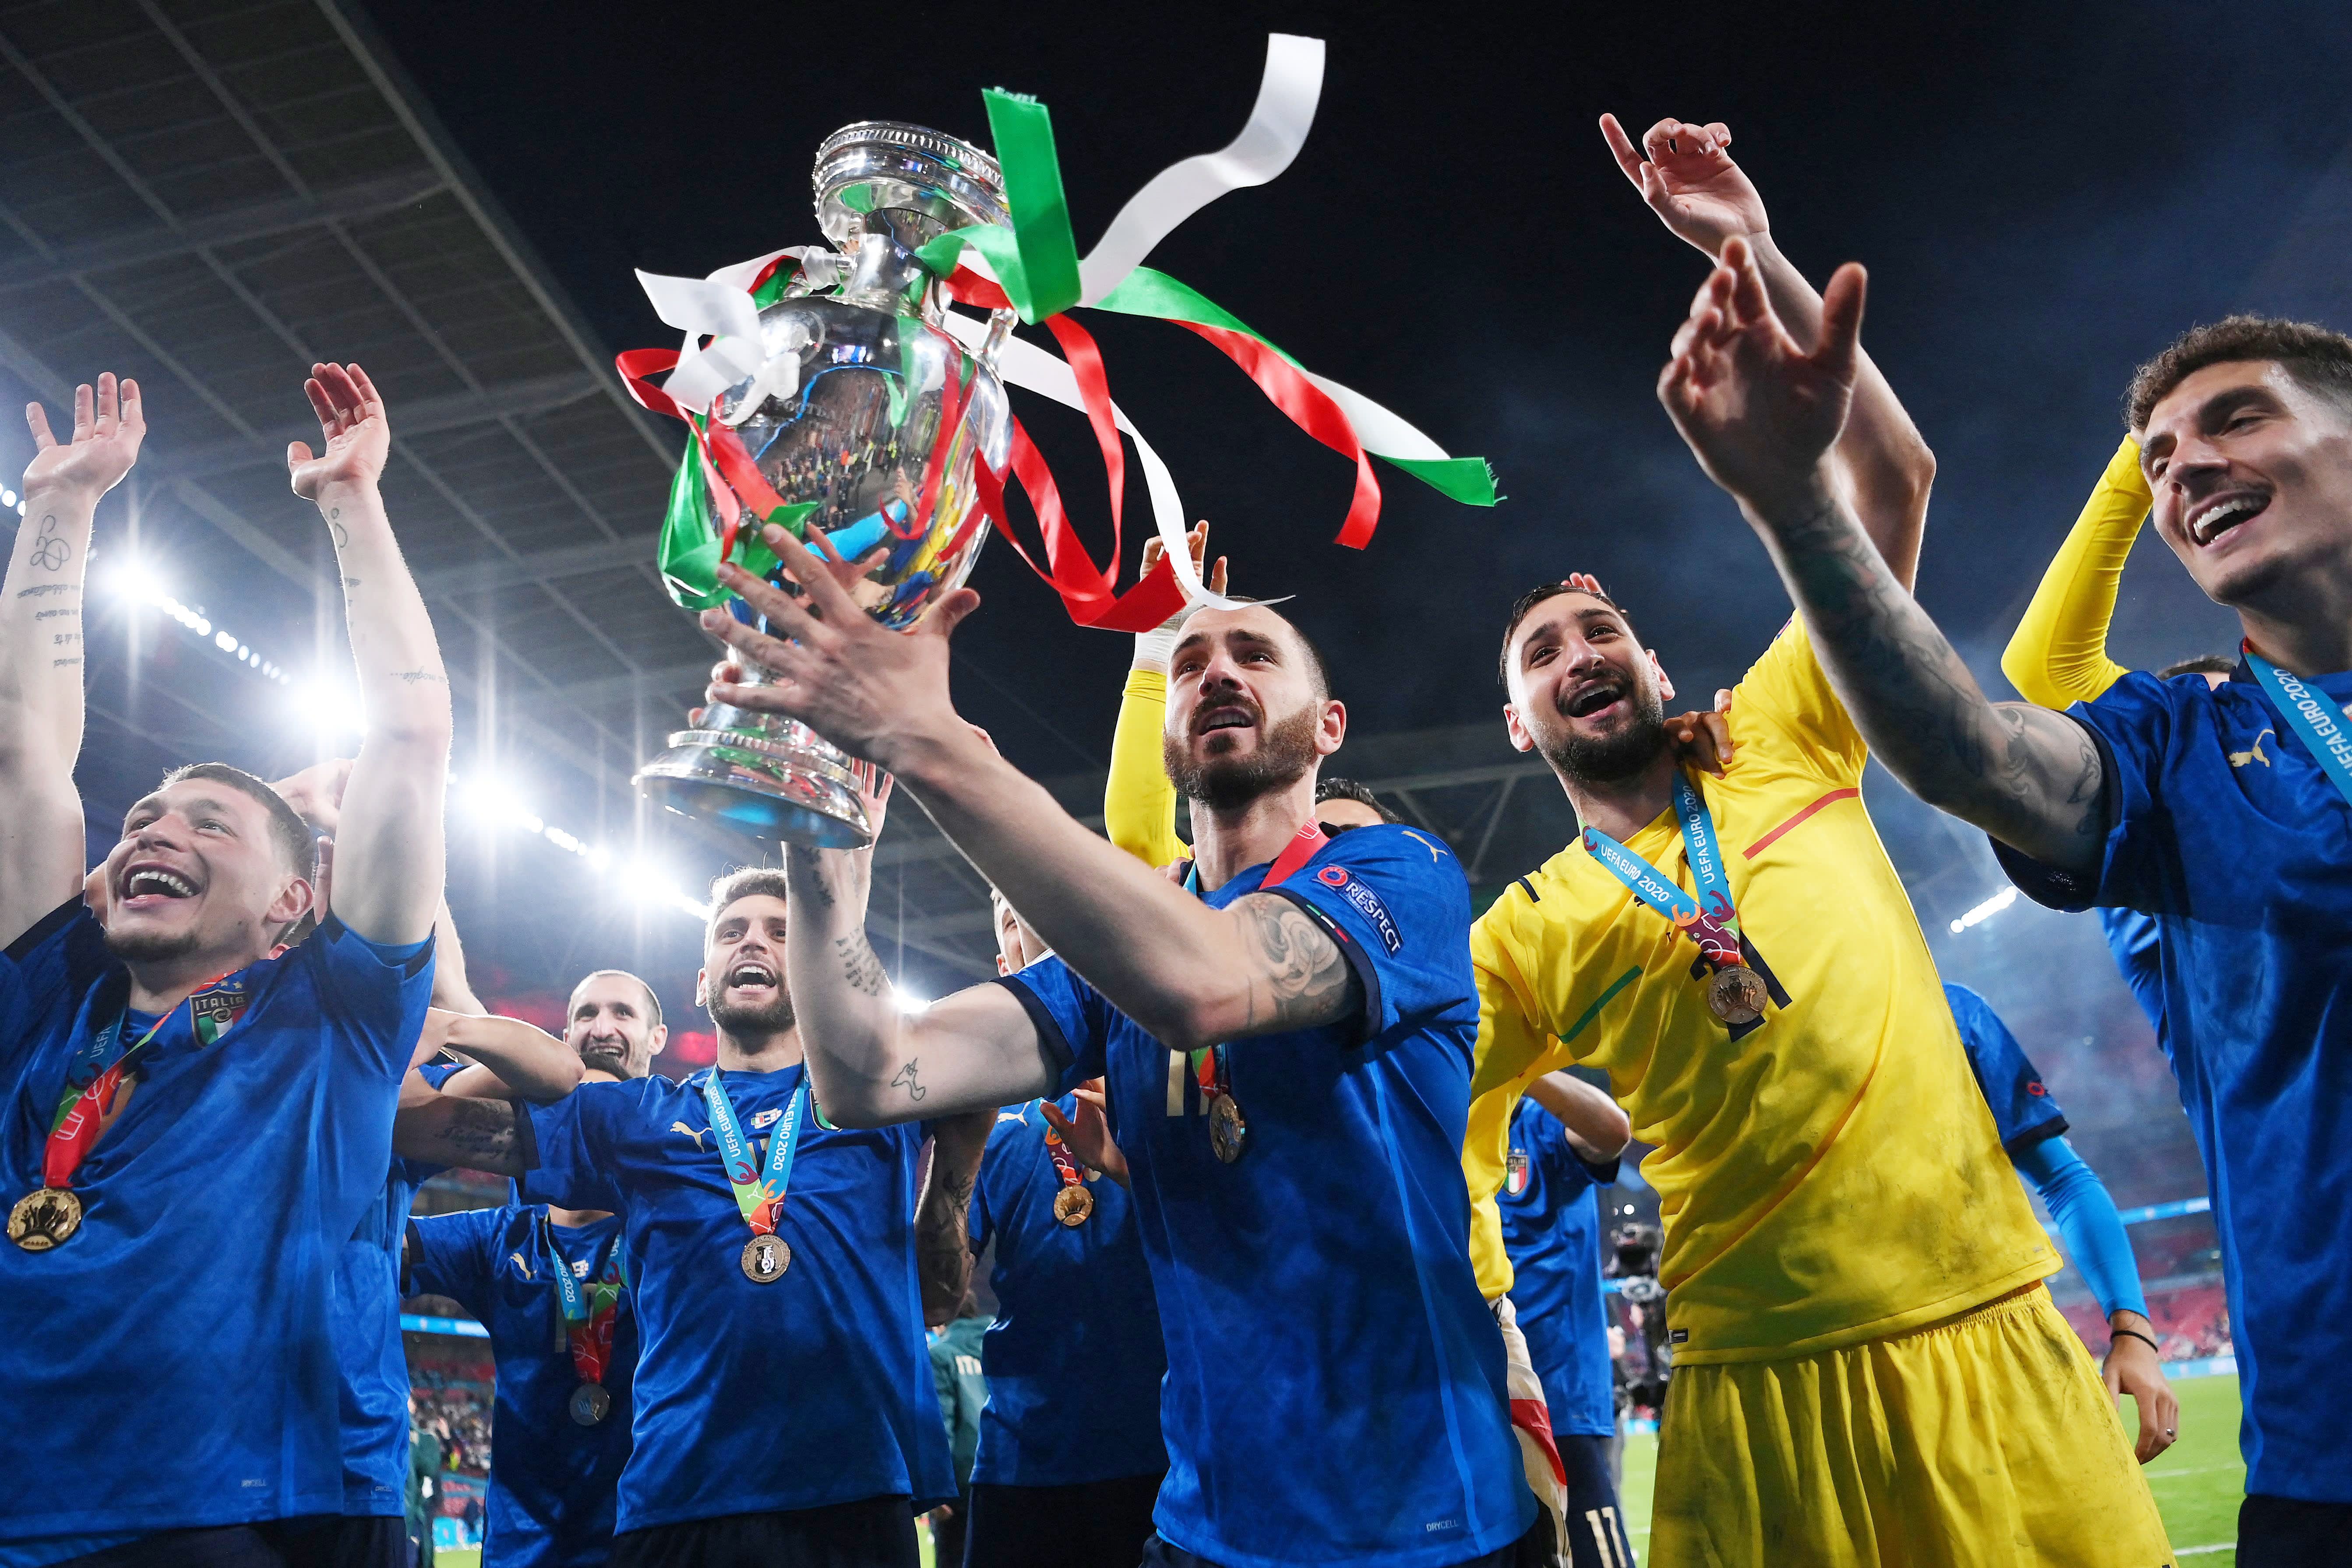 Italy beats England in a shootout to win the Euro 2020 soccer championship